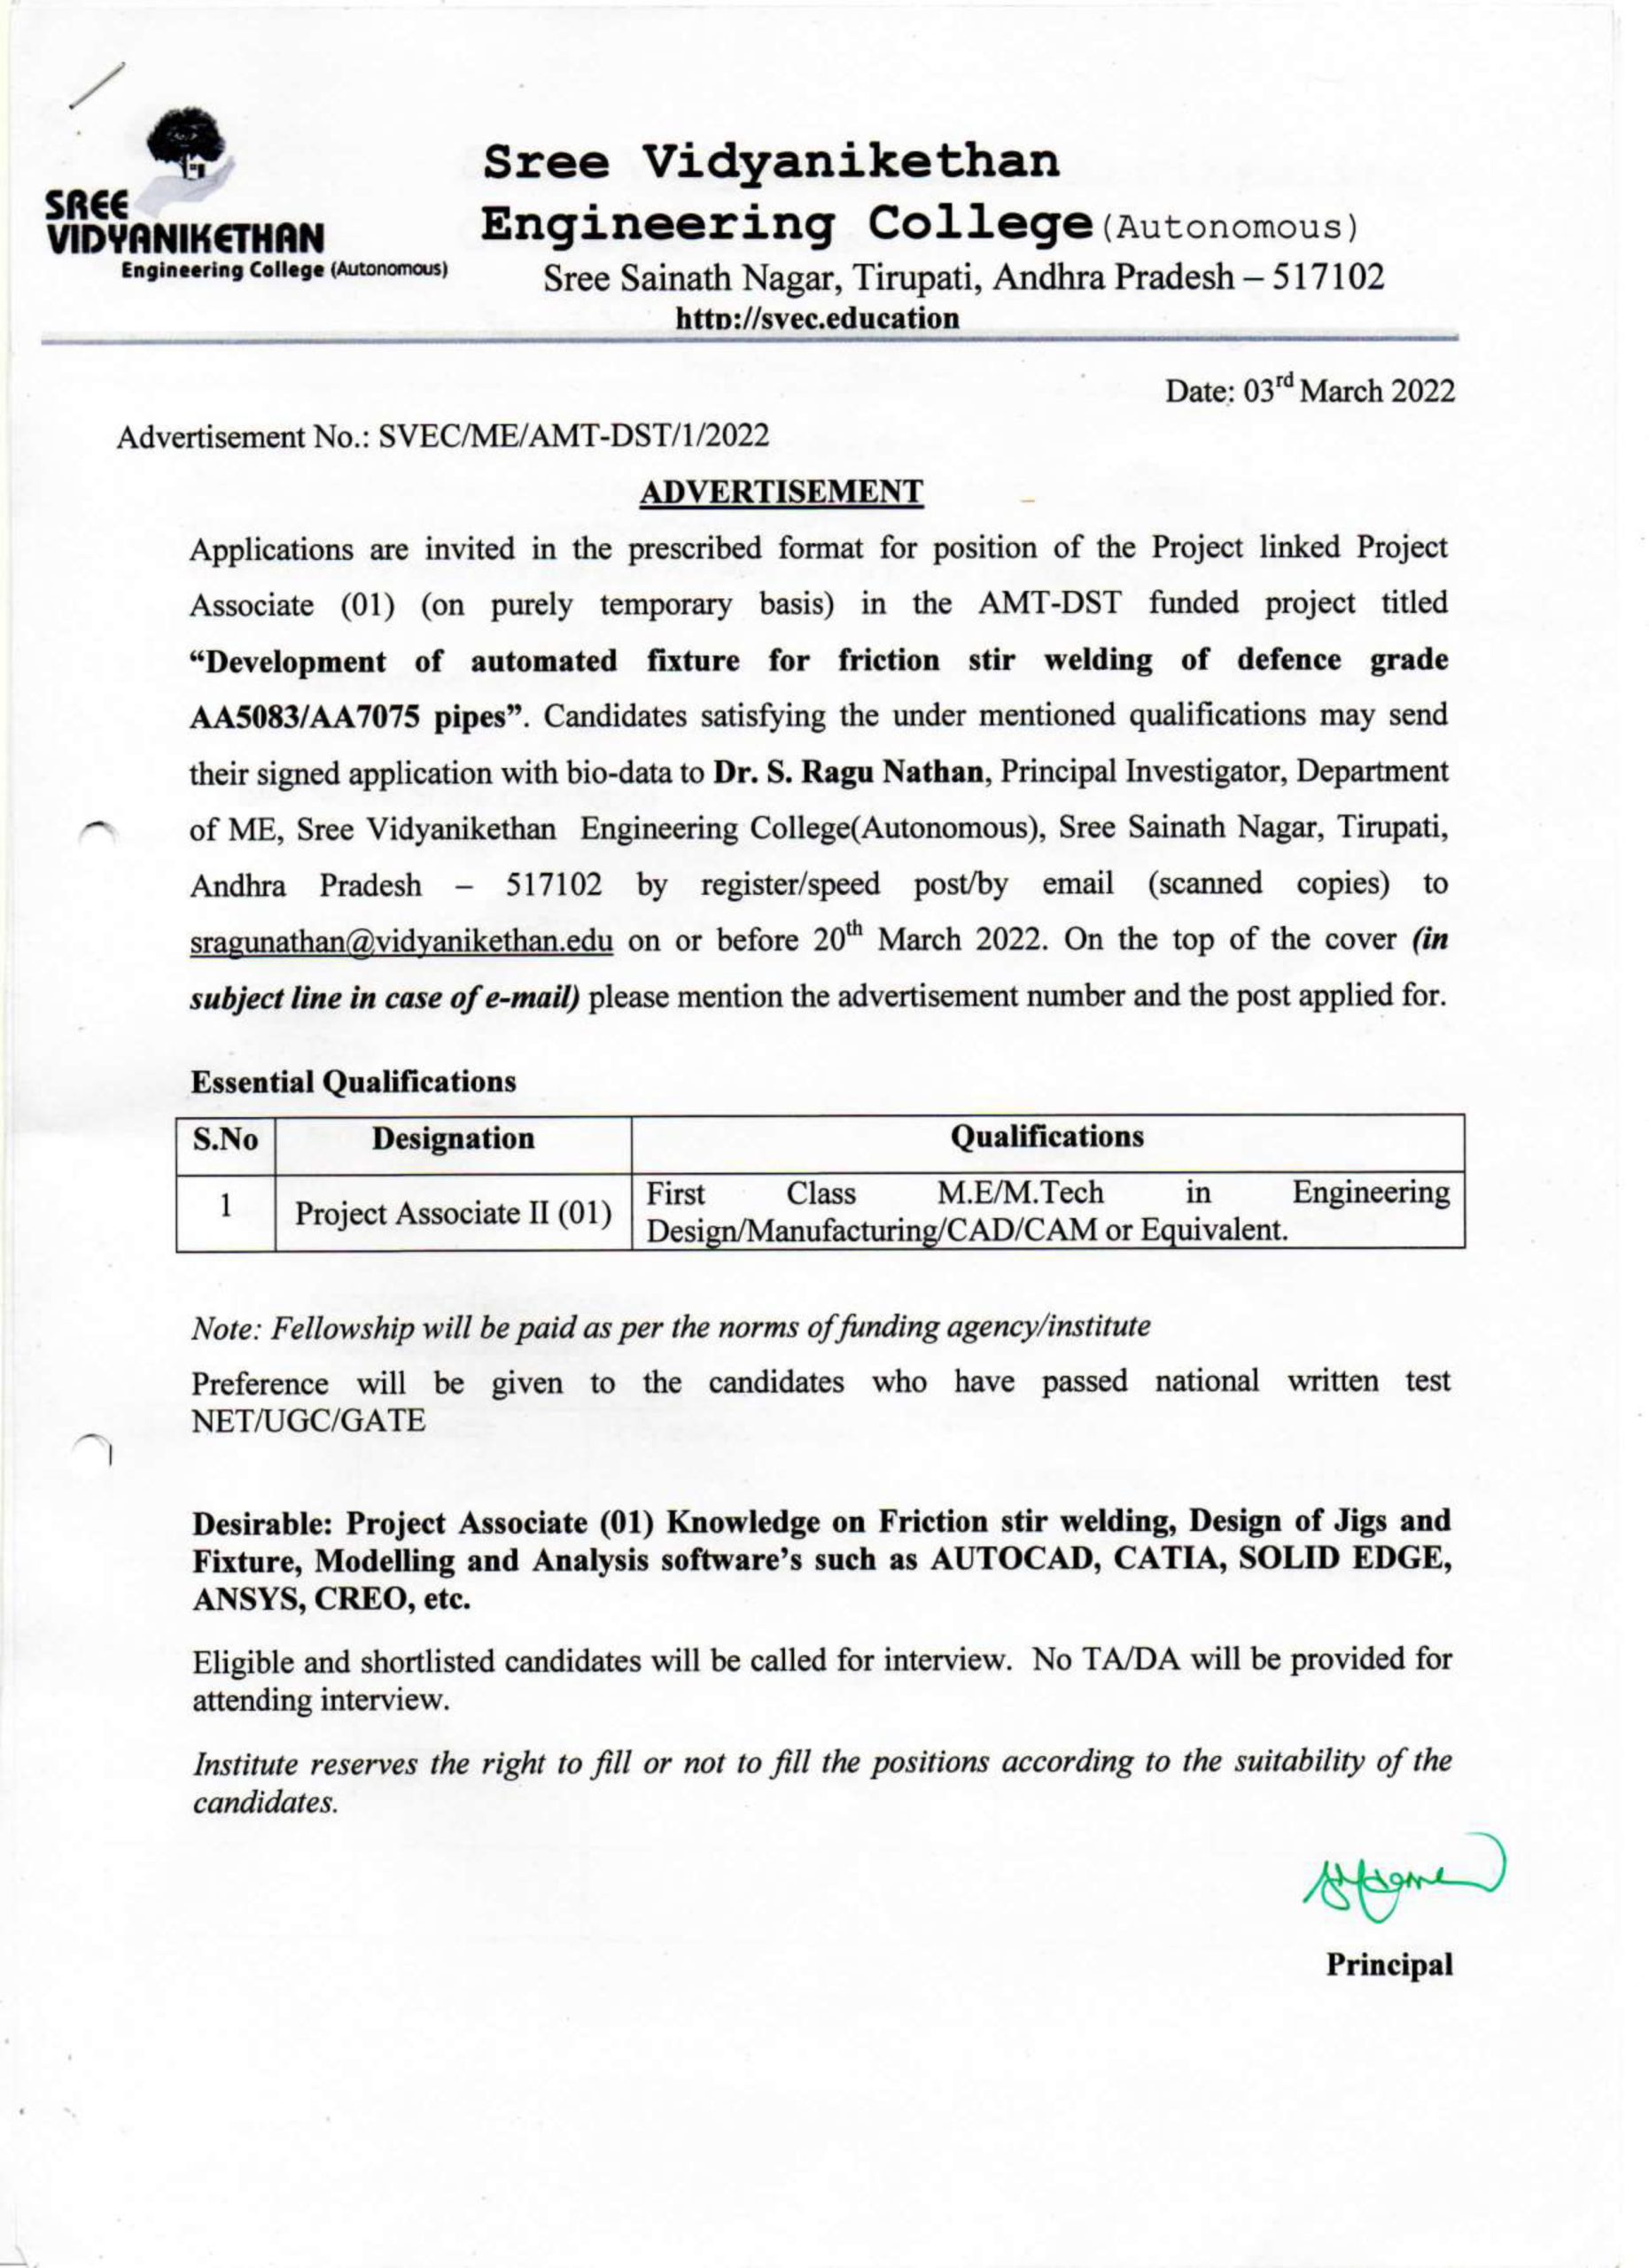 Recruitment Notification and Application for the Post of Project Associate for AMT-DST Funded Project “Development of Automated Fixture for Friction Stir Welding of Defence grade AA5083/AA7075 Pipes” (Adv. No. SVEC/ME/AMT-DST/1/2022)